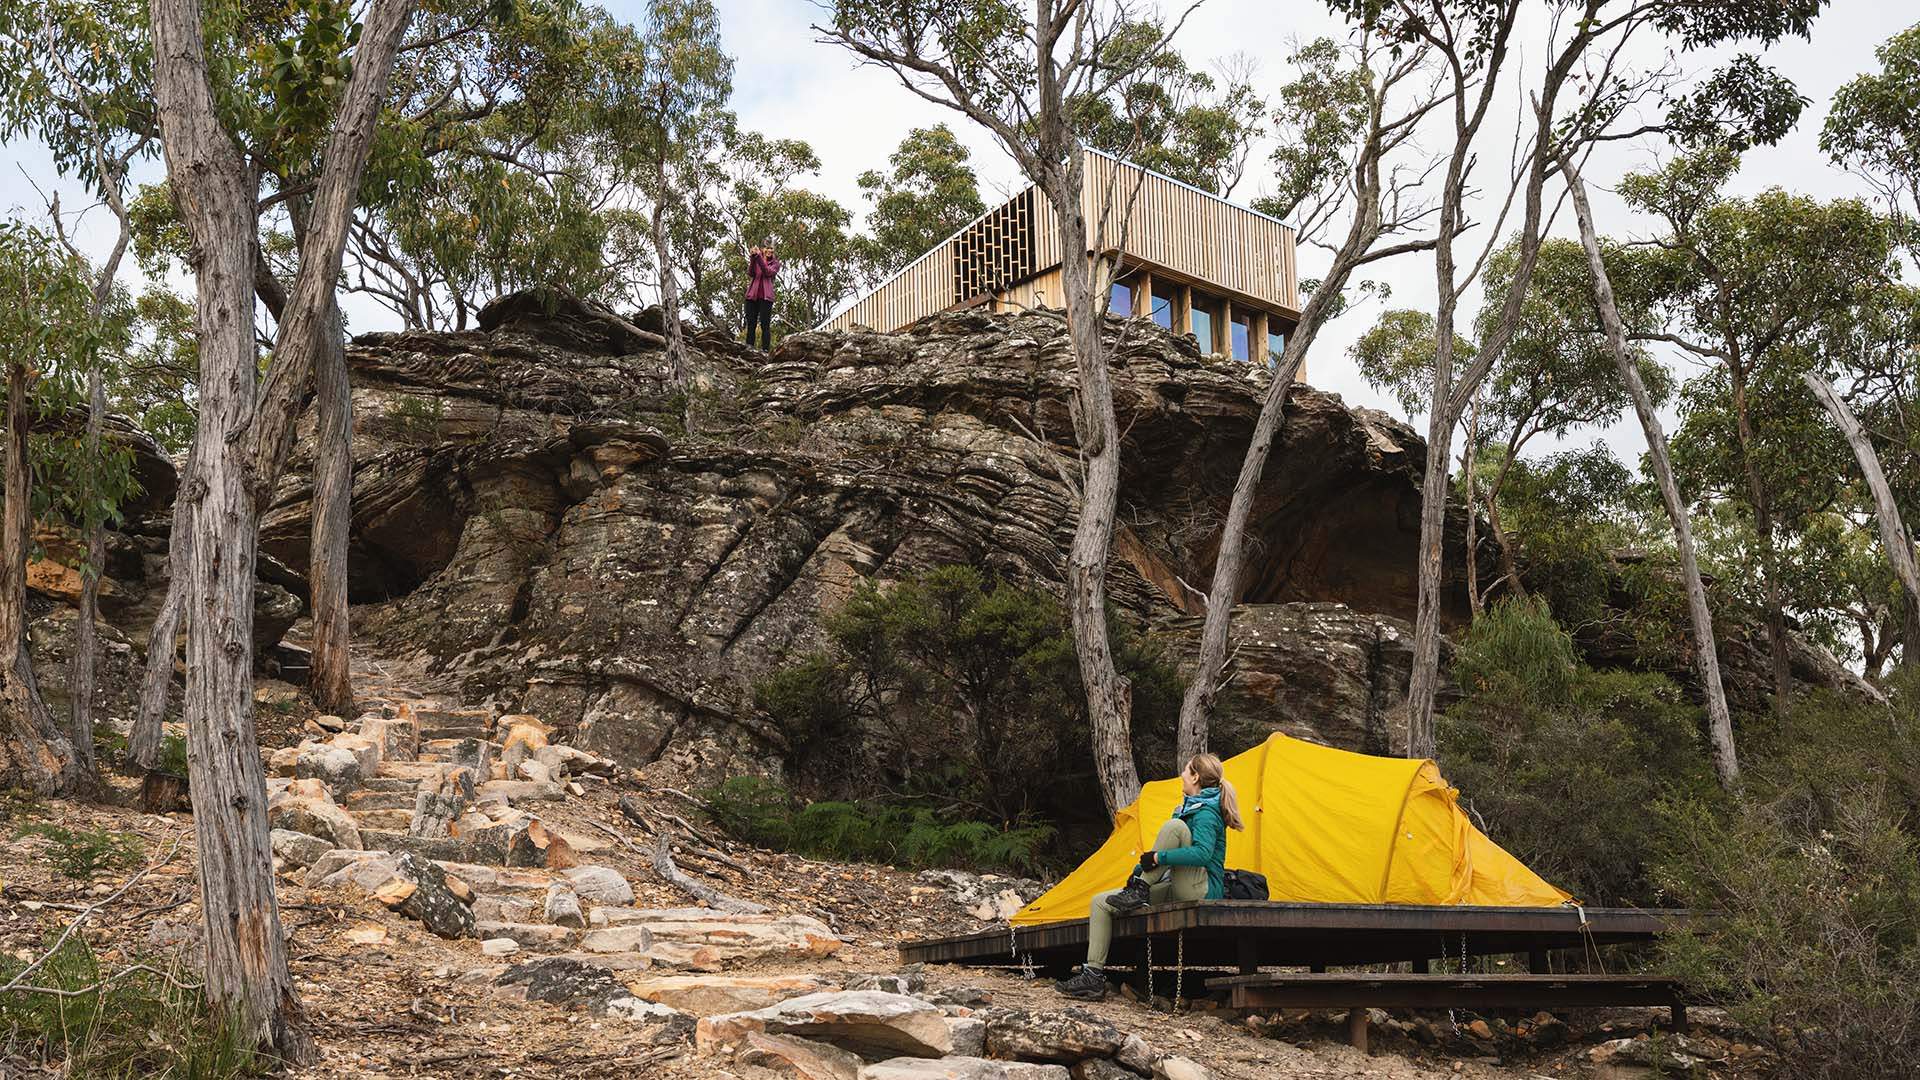 Victoria Just Scored 13 New and 28 Upgraded Campgrounds Across the State